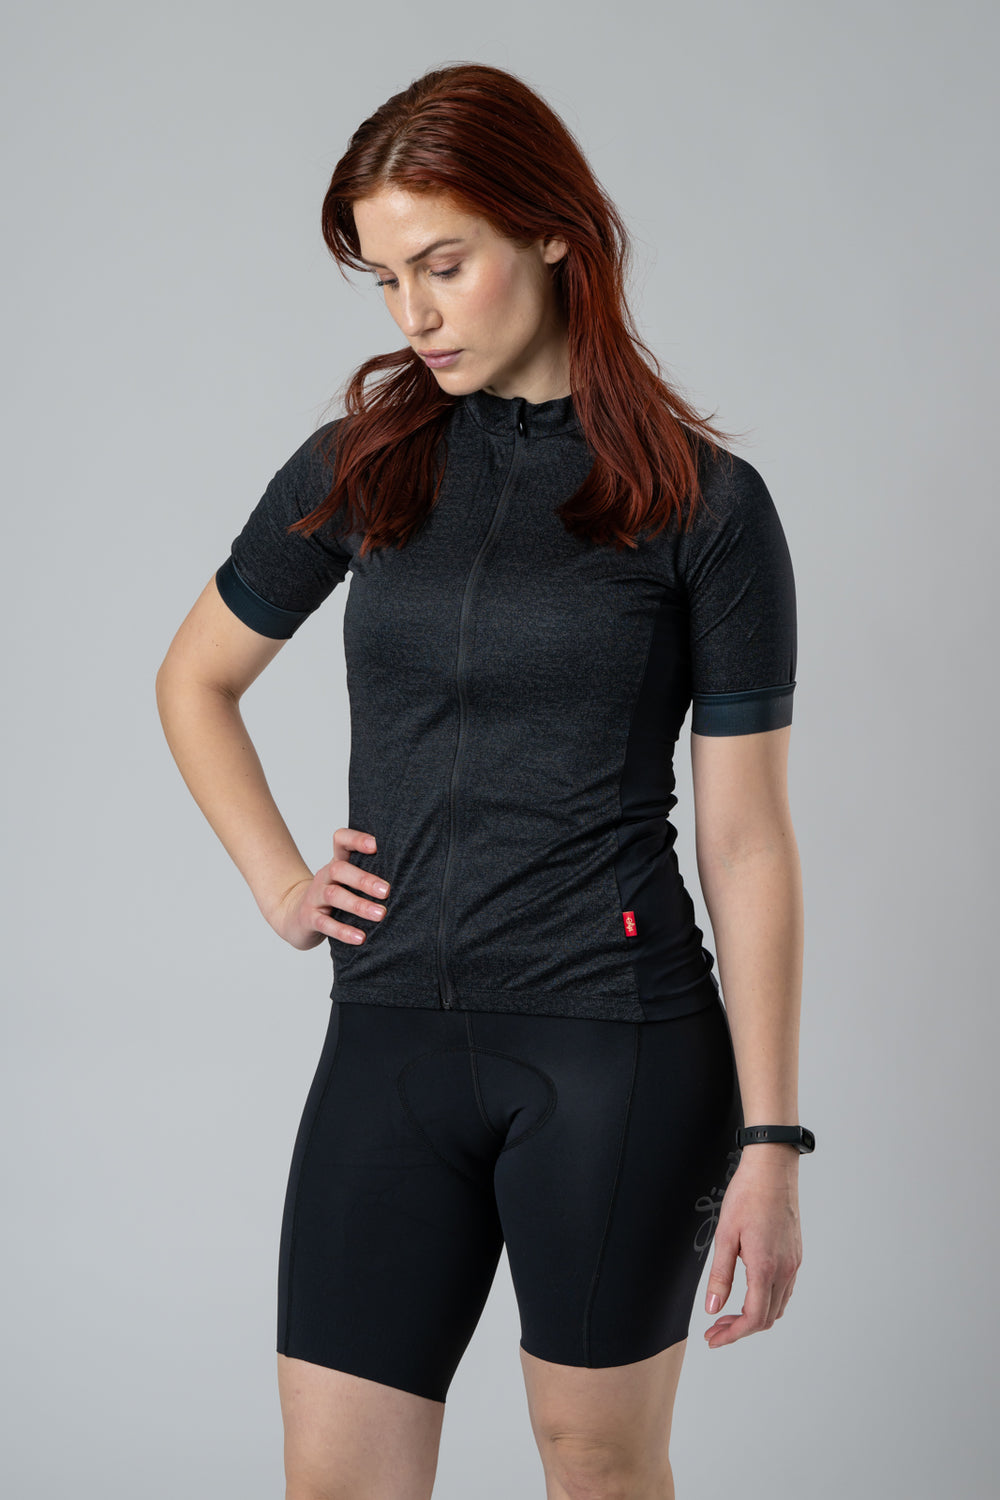 Reflective Cycling Jersey for Women -'Grus Norrsken' by Sigr Swedish ...